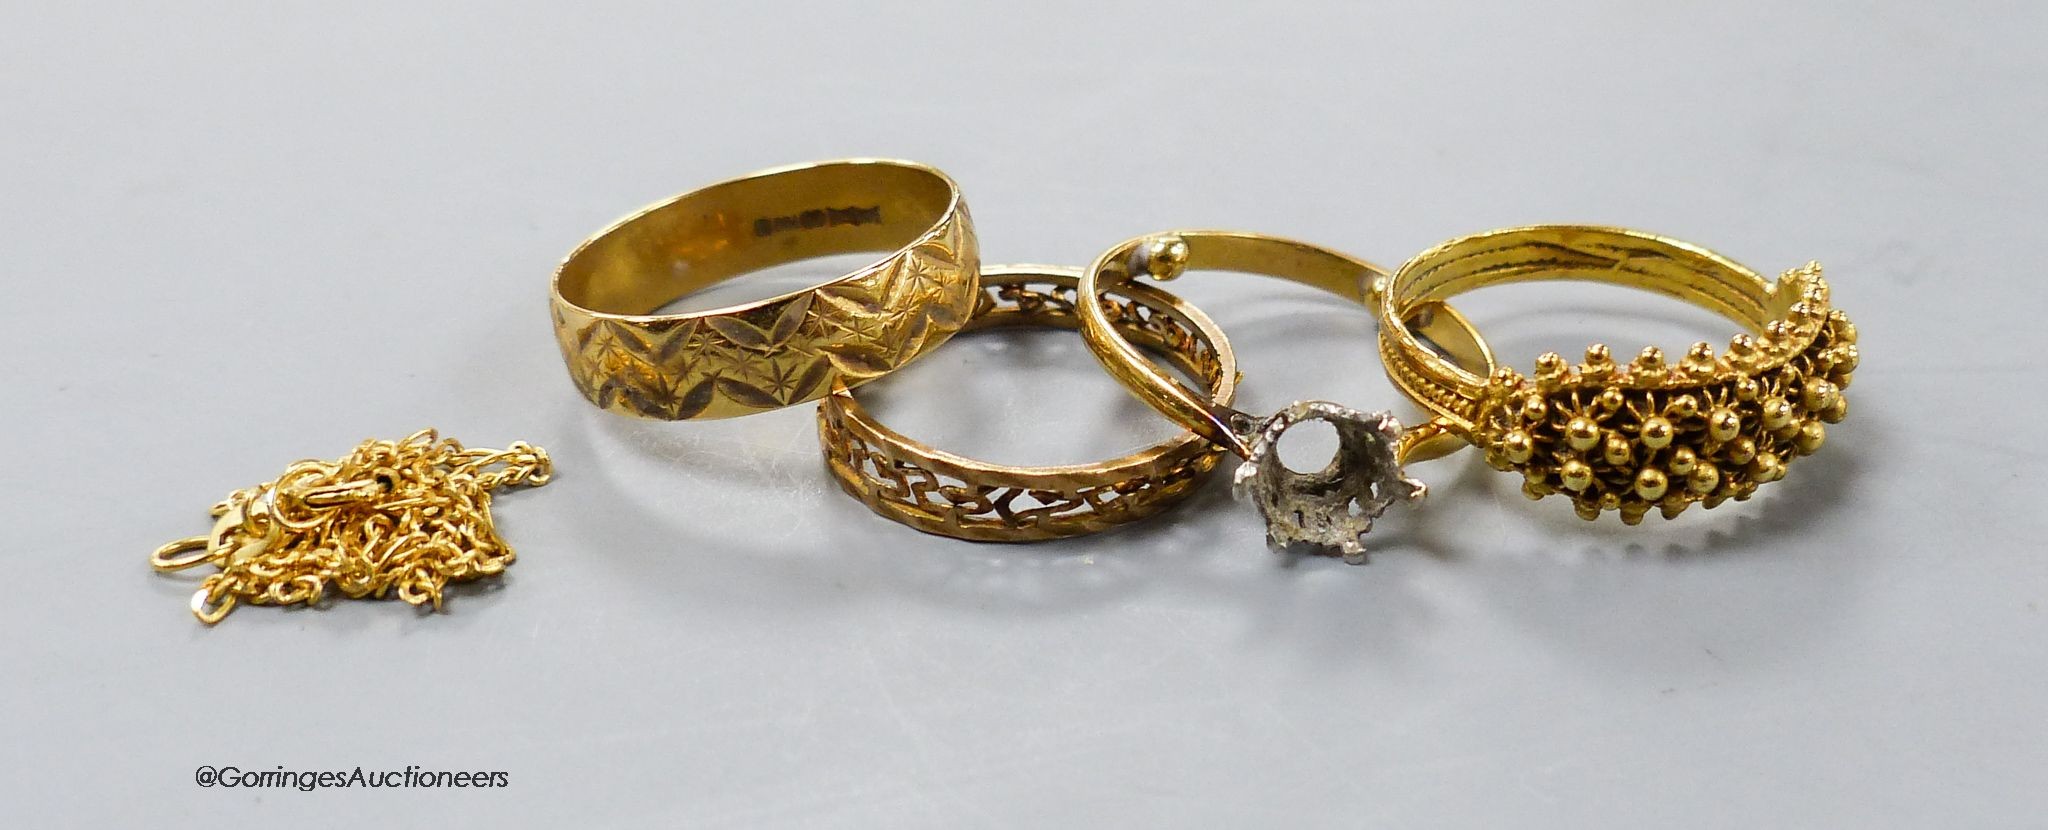 An 18ct gold tablet ring decorated with spheres and an 18ct gold wedding ring 5.6 grams, a yellow metal ring with vacant setting, a pierced 9ct band and a 9ct gold fine chain bracelet, 3 grams.